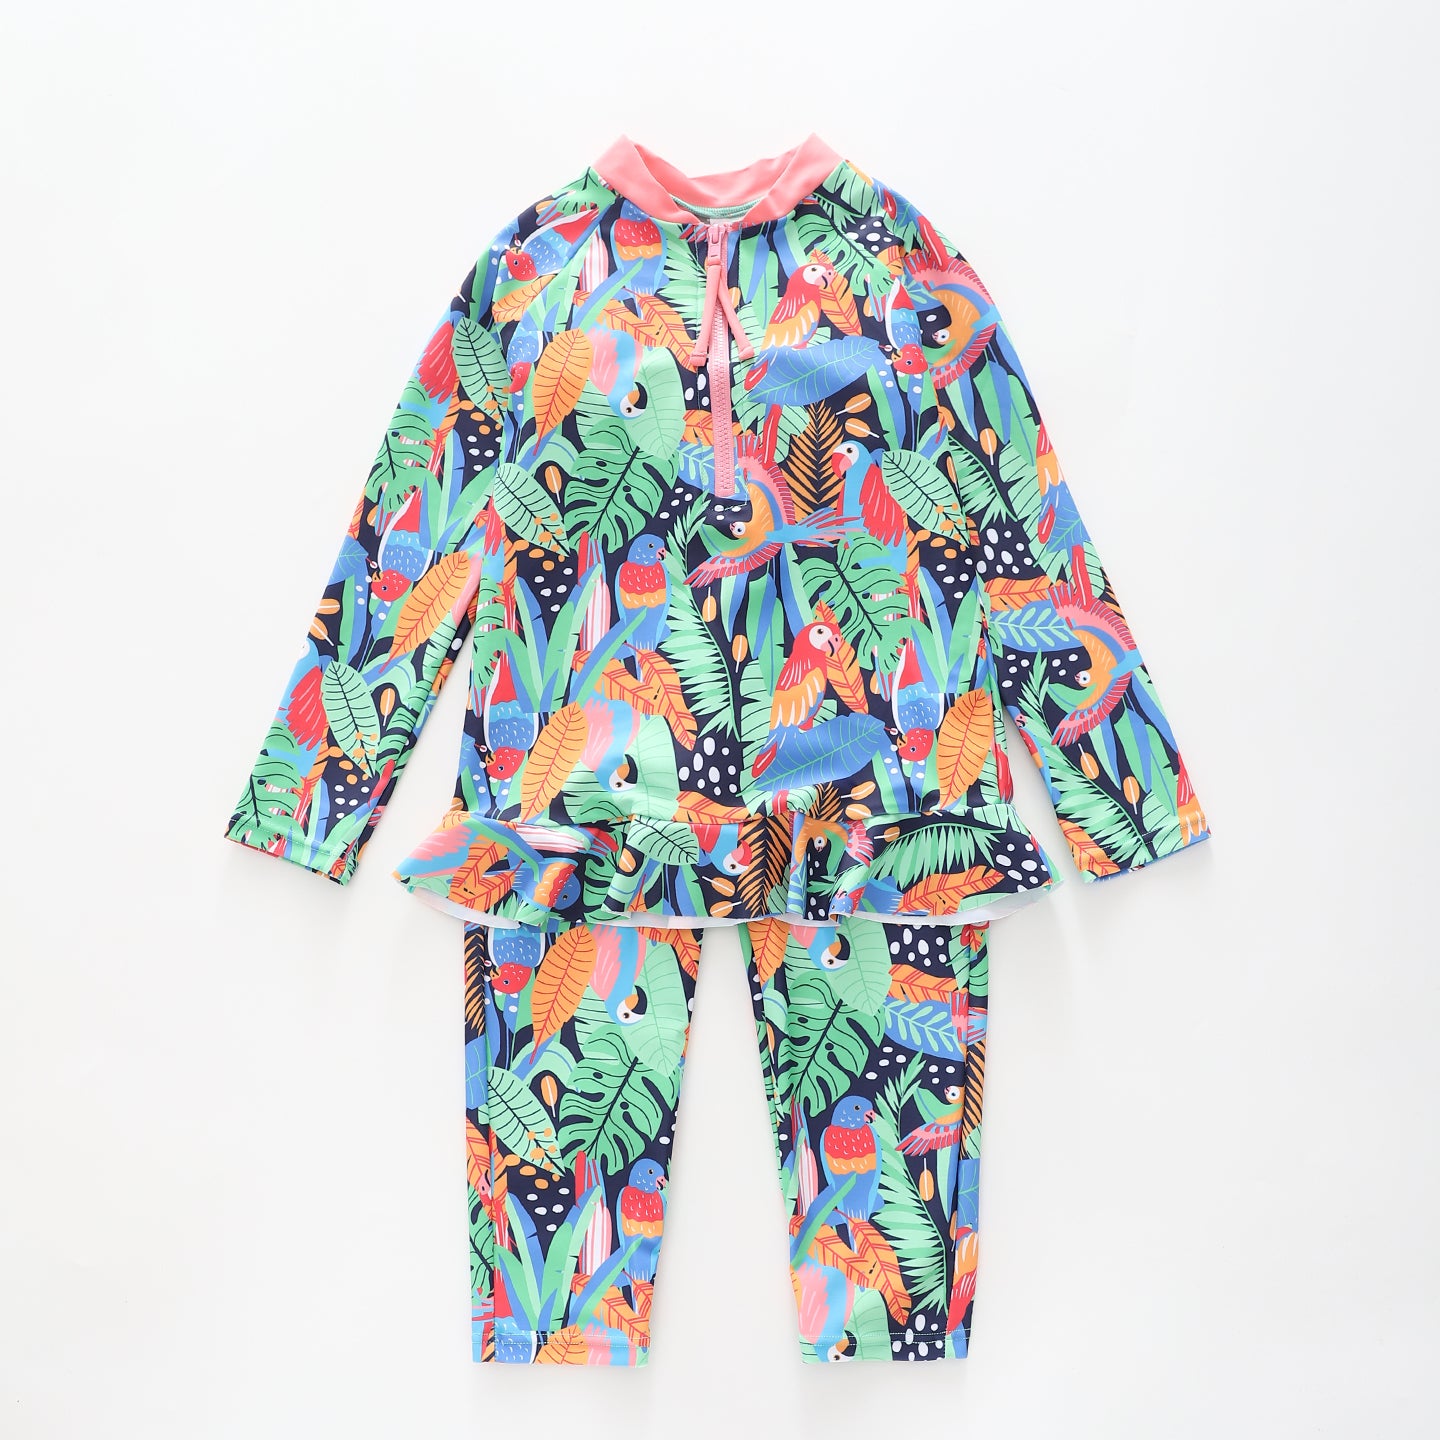 Girl's Jungle Print Pink and Green Long Sleeve Swimsuit Set